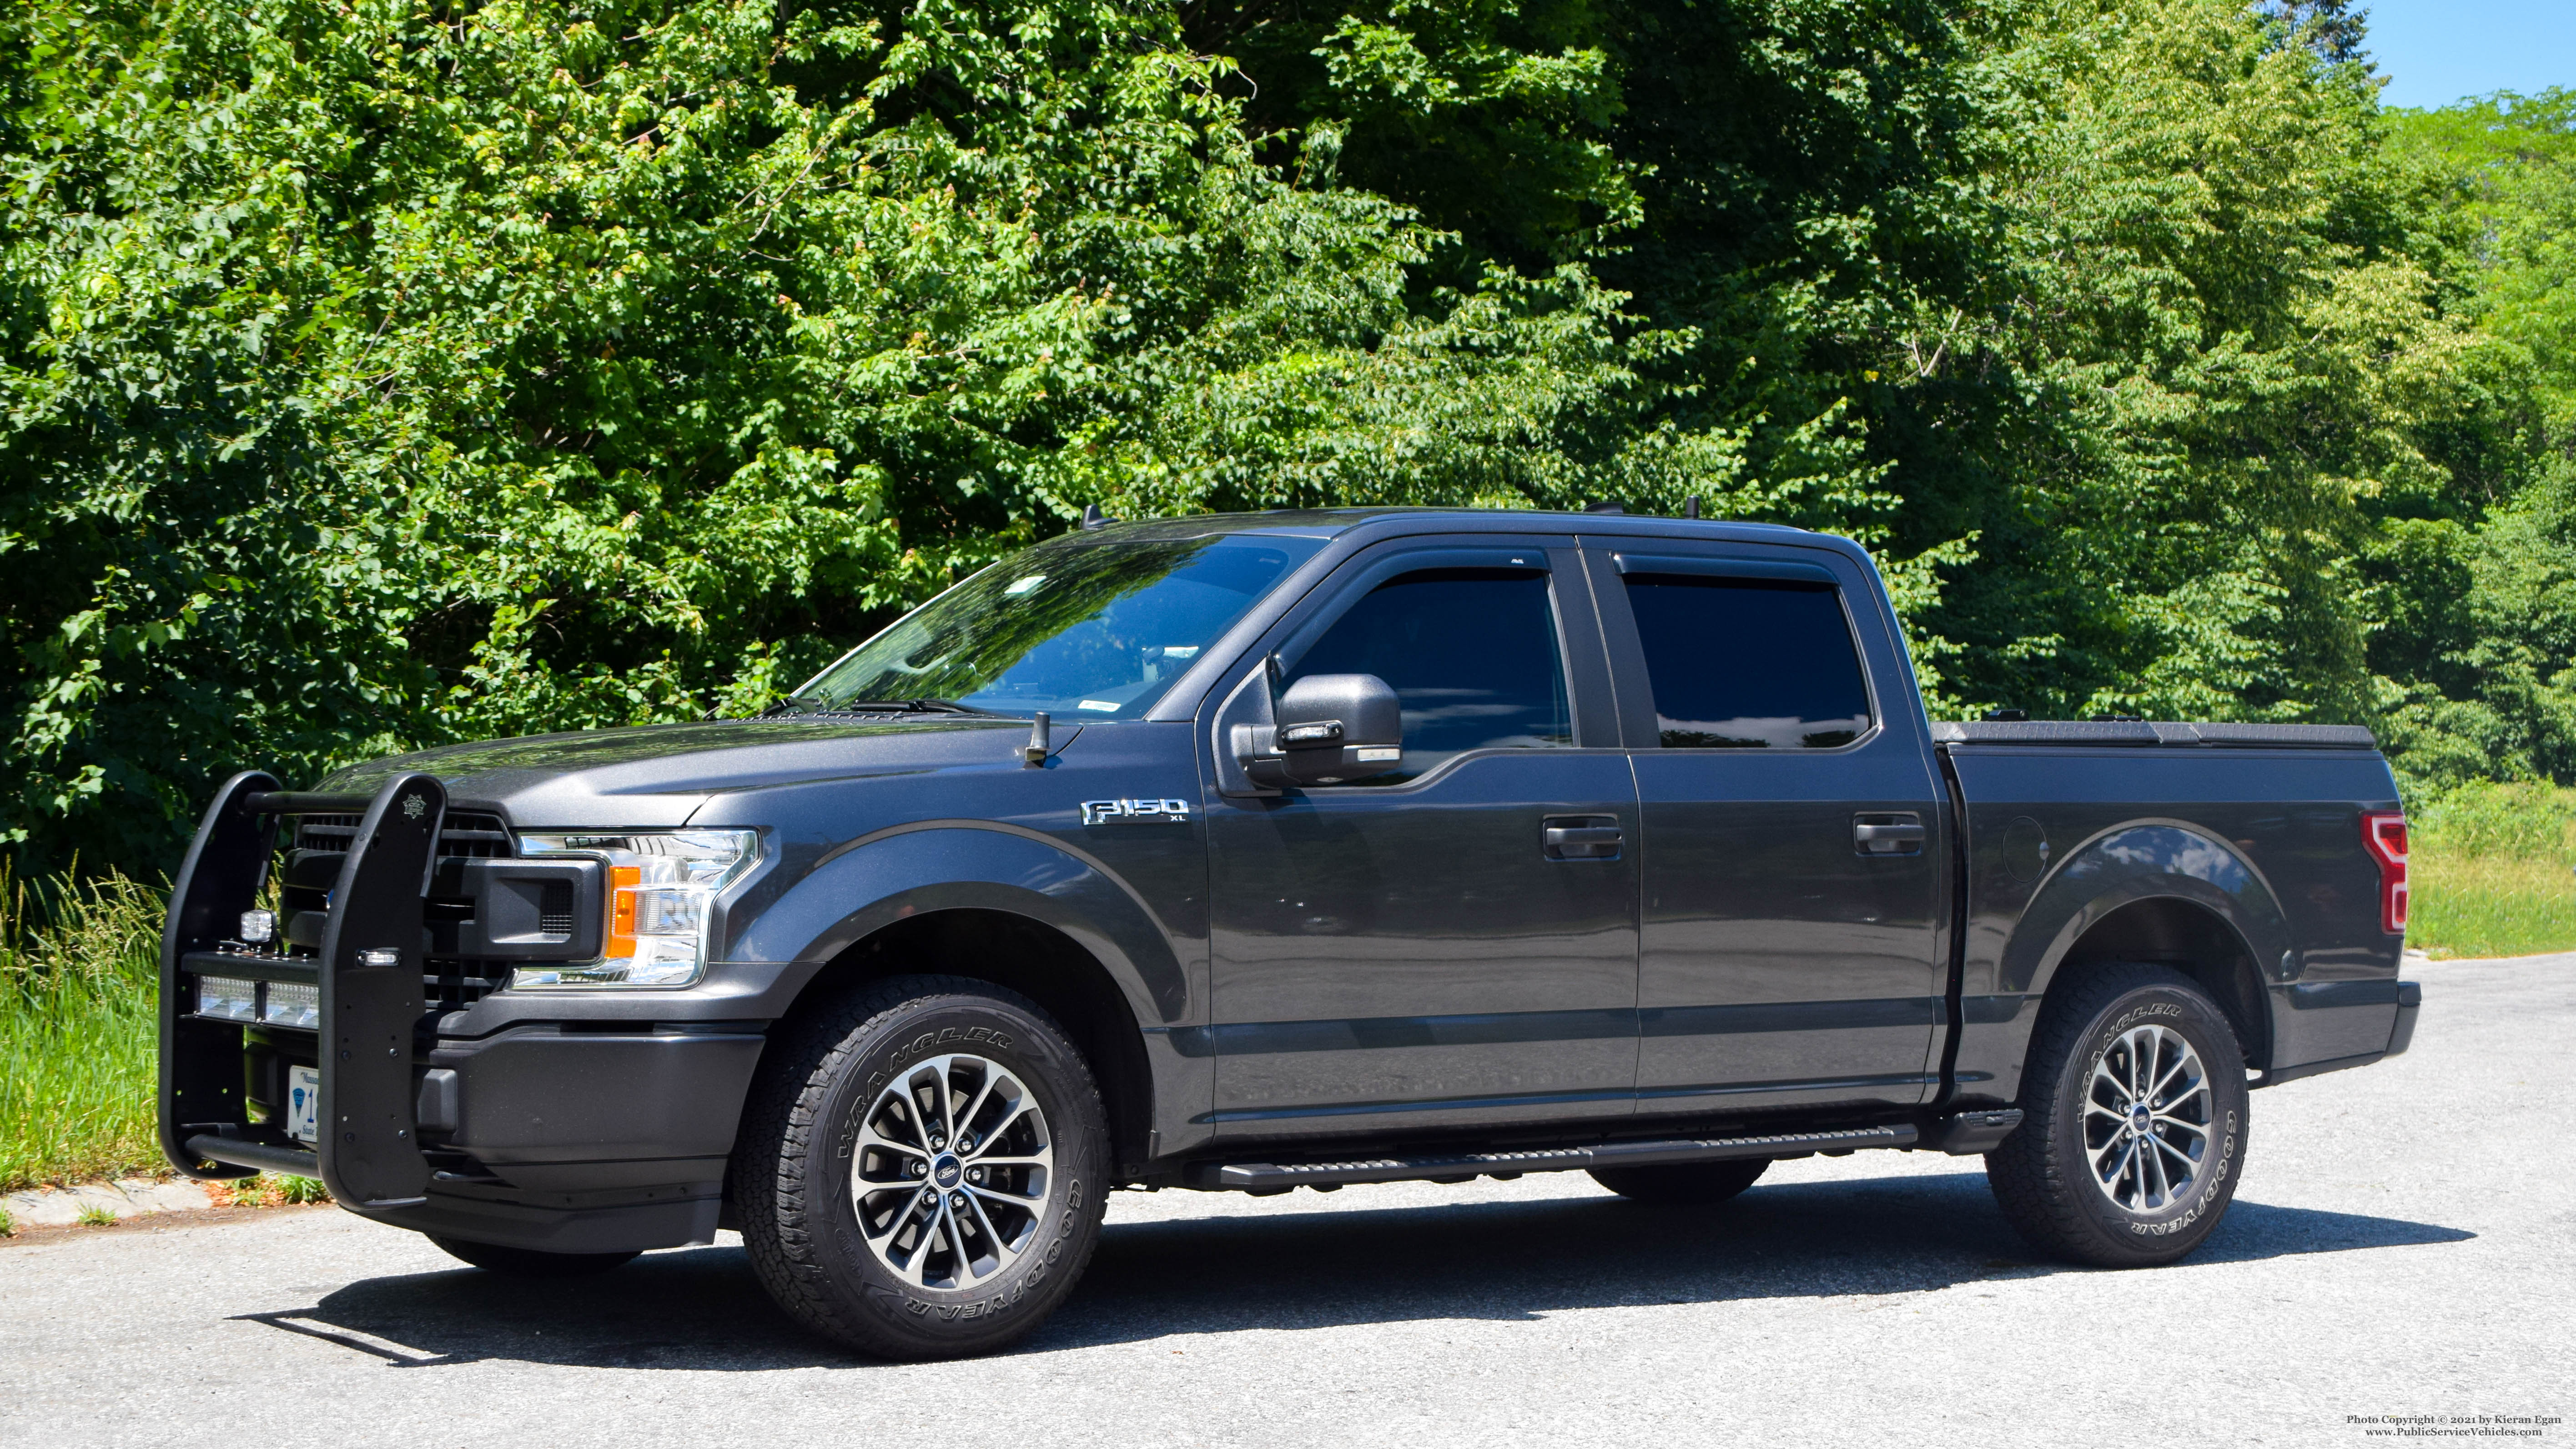 A photo  of Massachusetts State Police
            Cruiser 1842T, a 2020 Ford F-150 Police Responder             taken by Kieran Egan